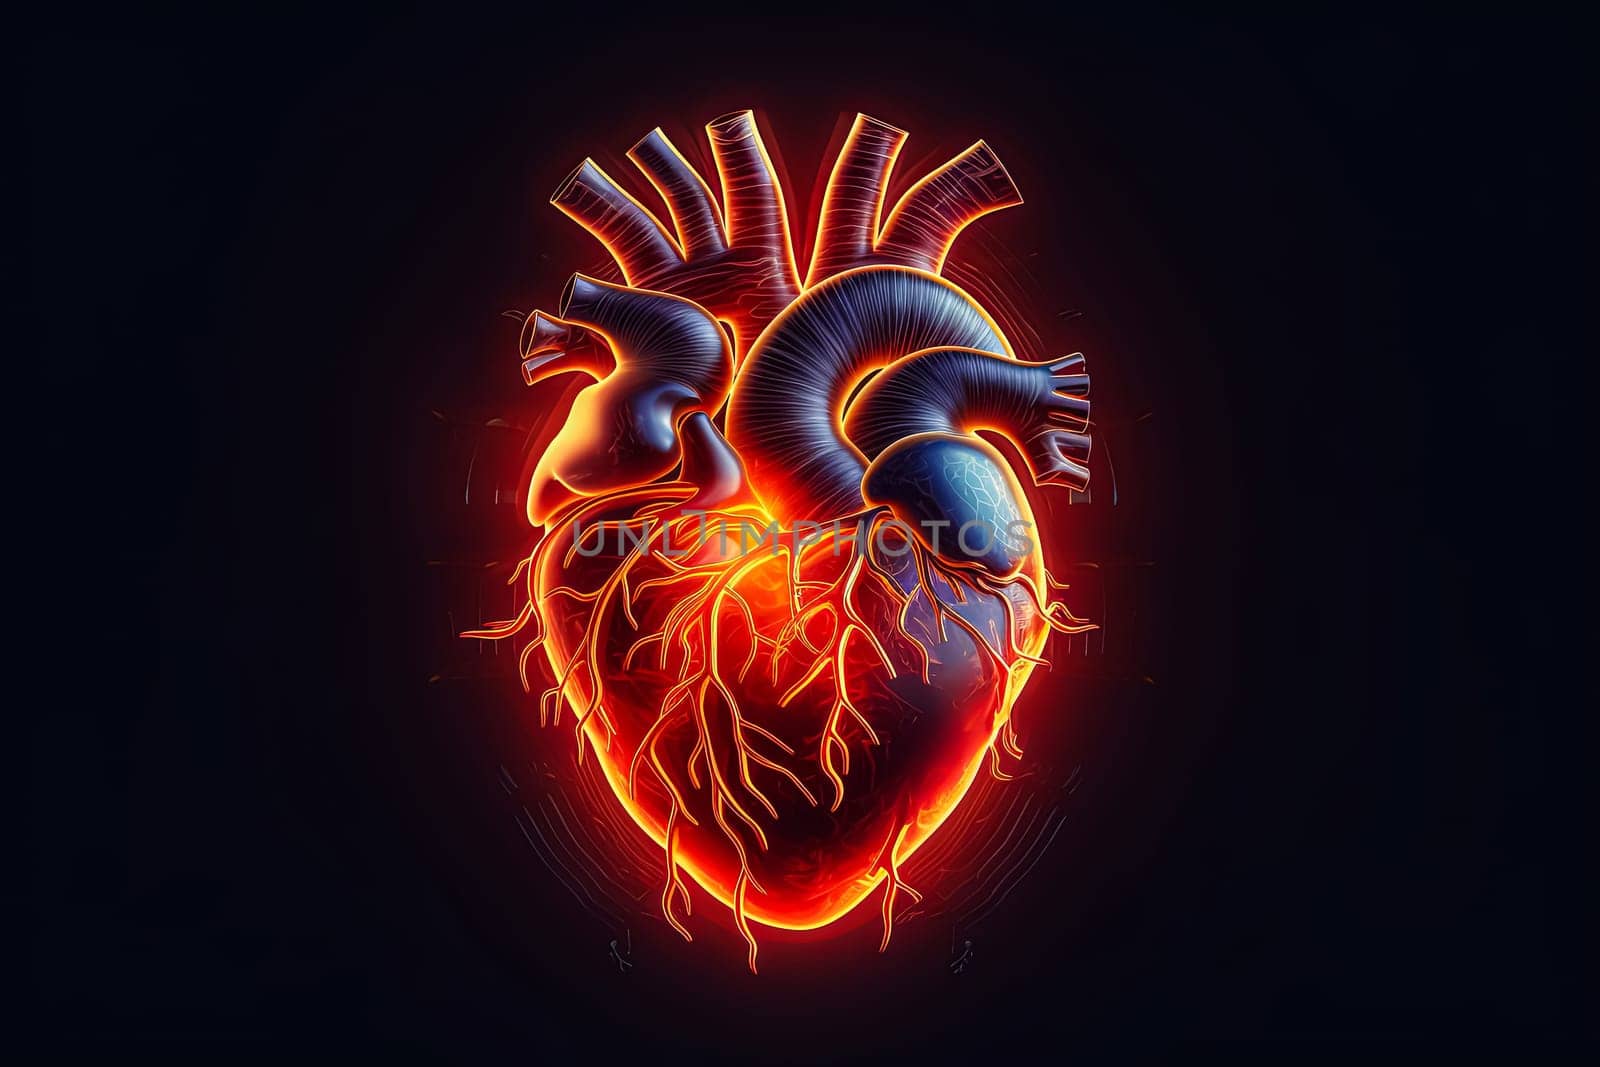 A heart with flames coming out of it. The heart is surrounded by a black background